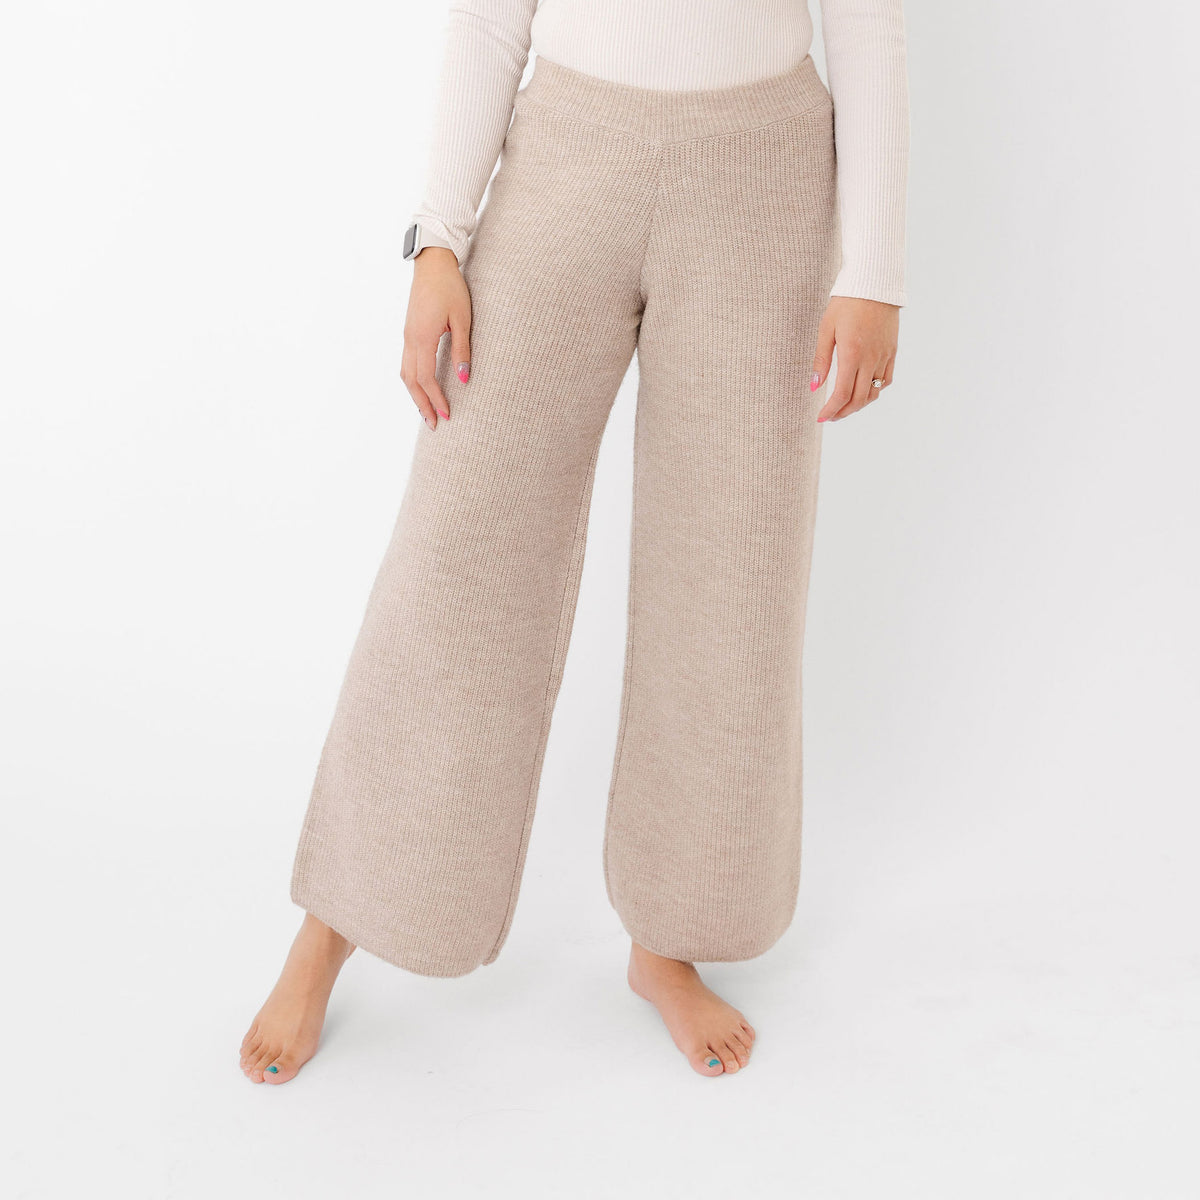 A. Peach Cable Knit Wide Leg Pant - Women's Pants in Oatmeal